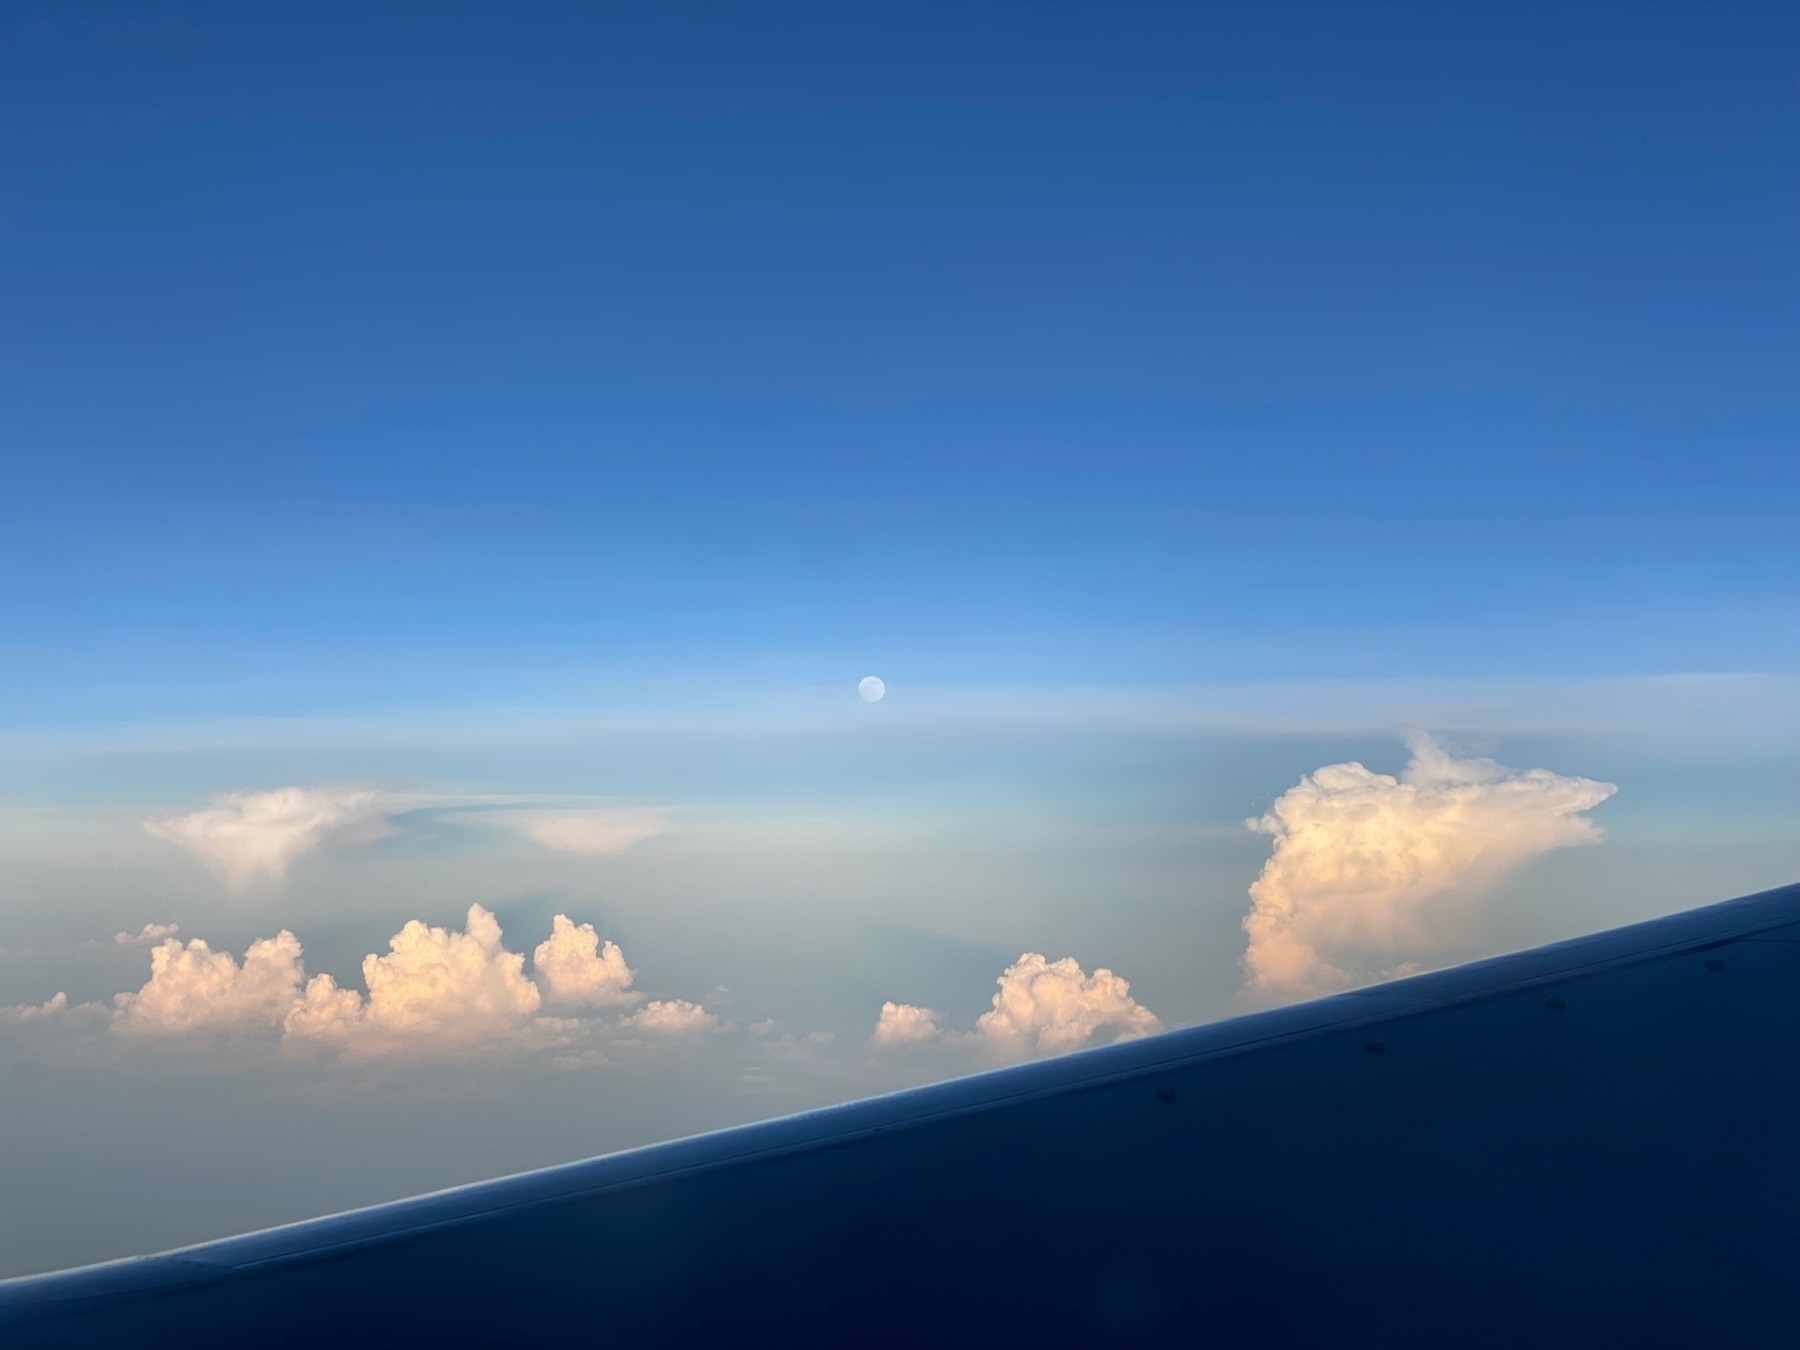 Clouds lit by the setting sun from the window of an airplane, with the nearly full moon just above the horizon.